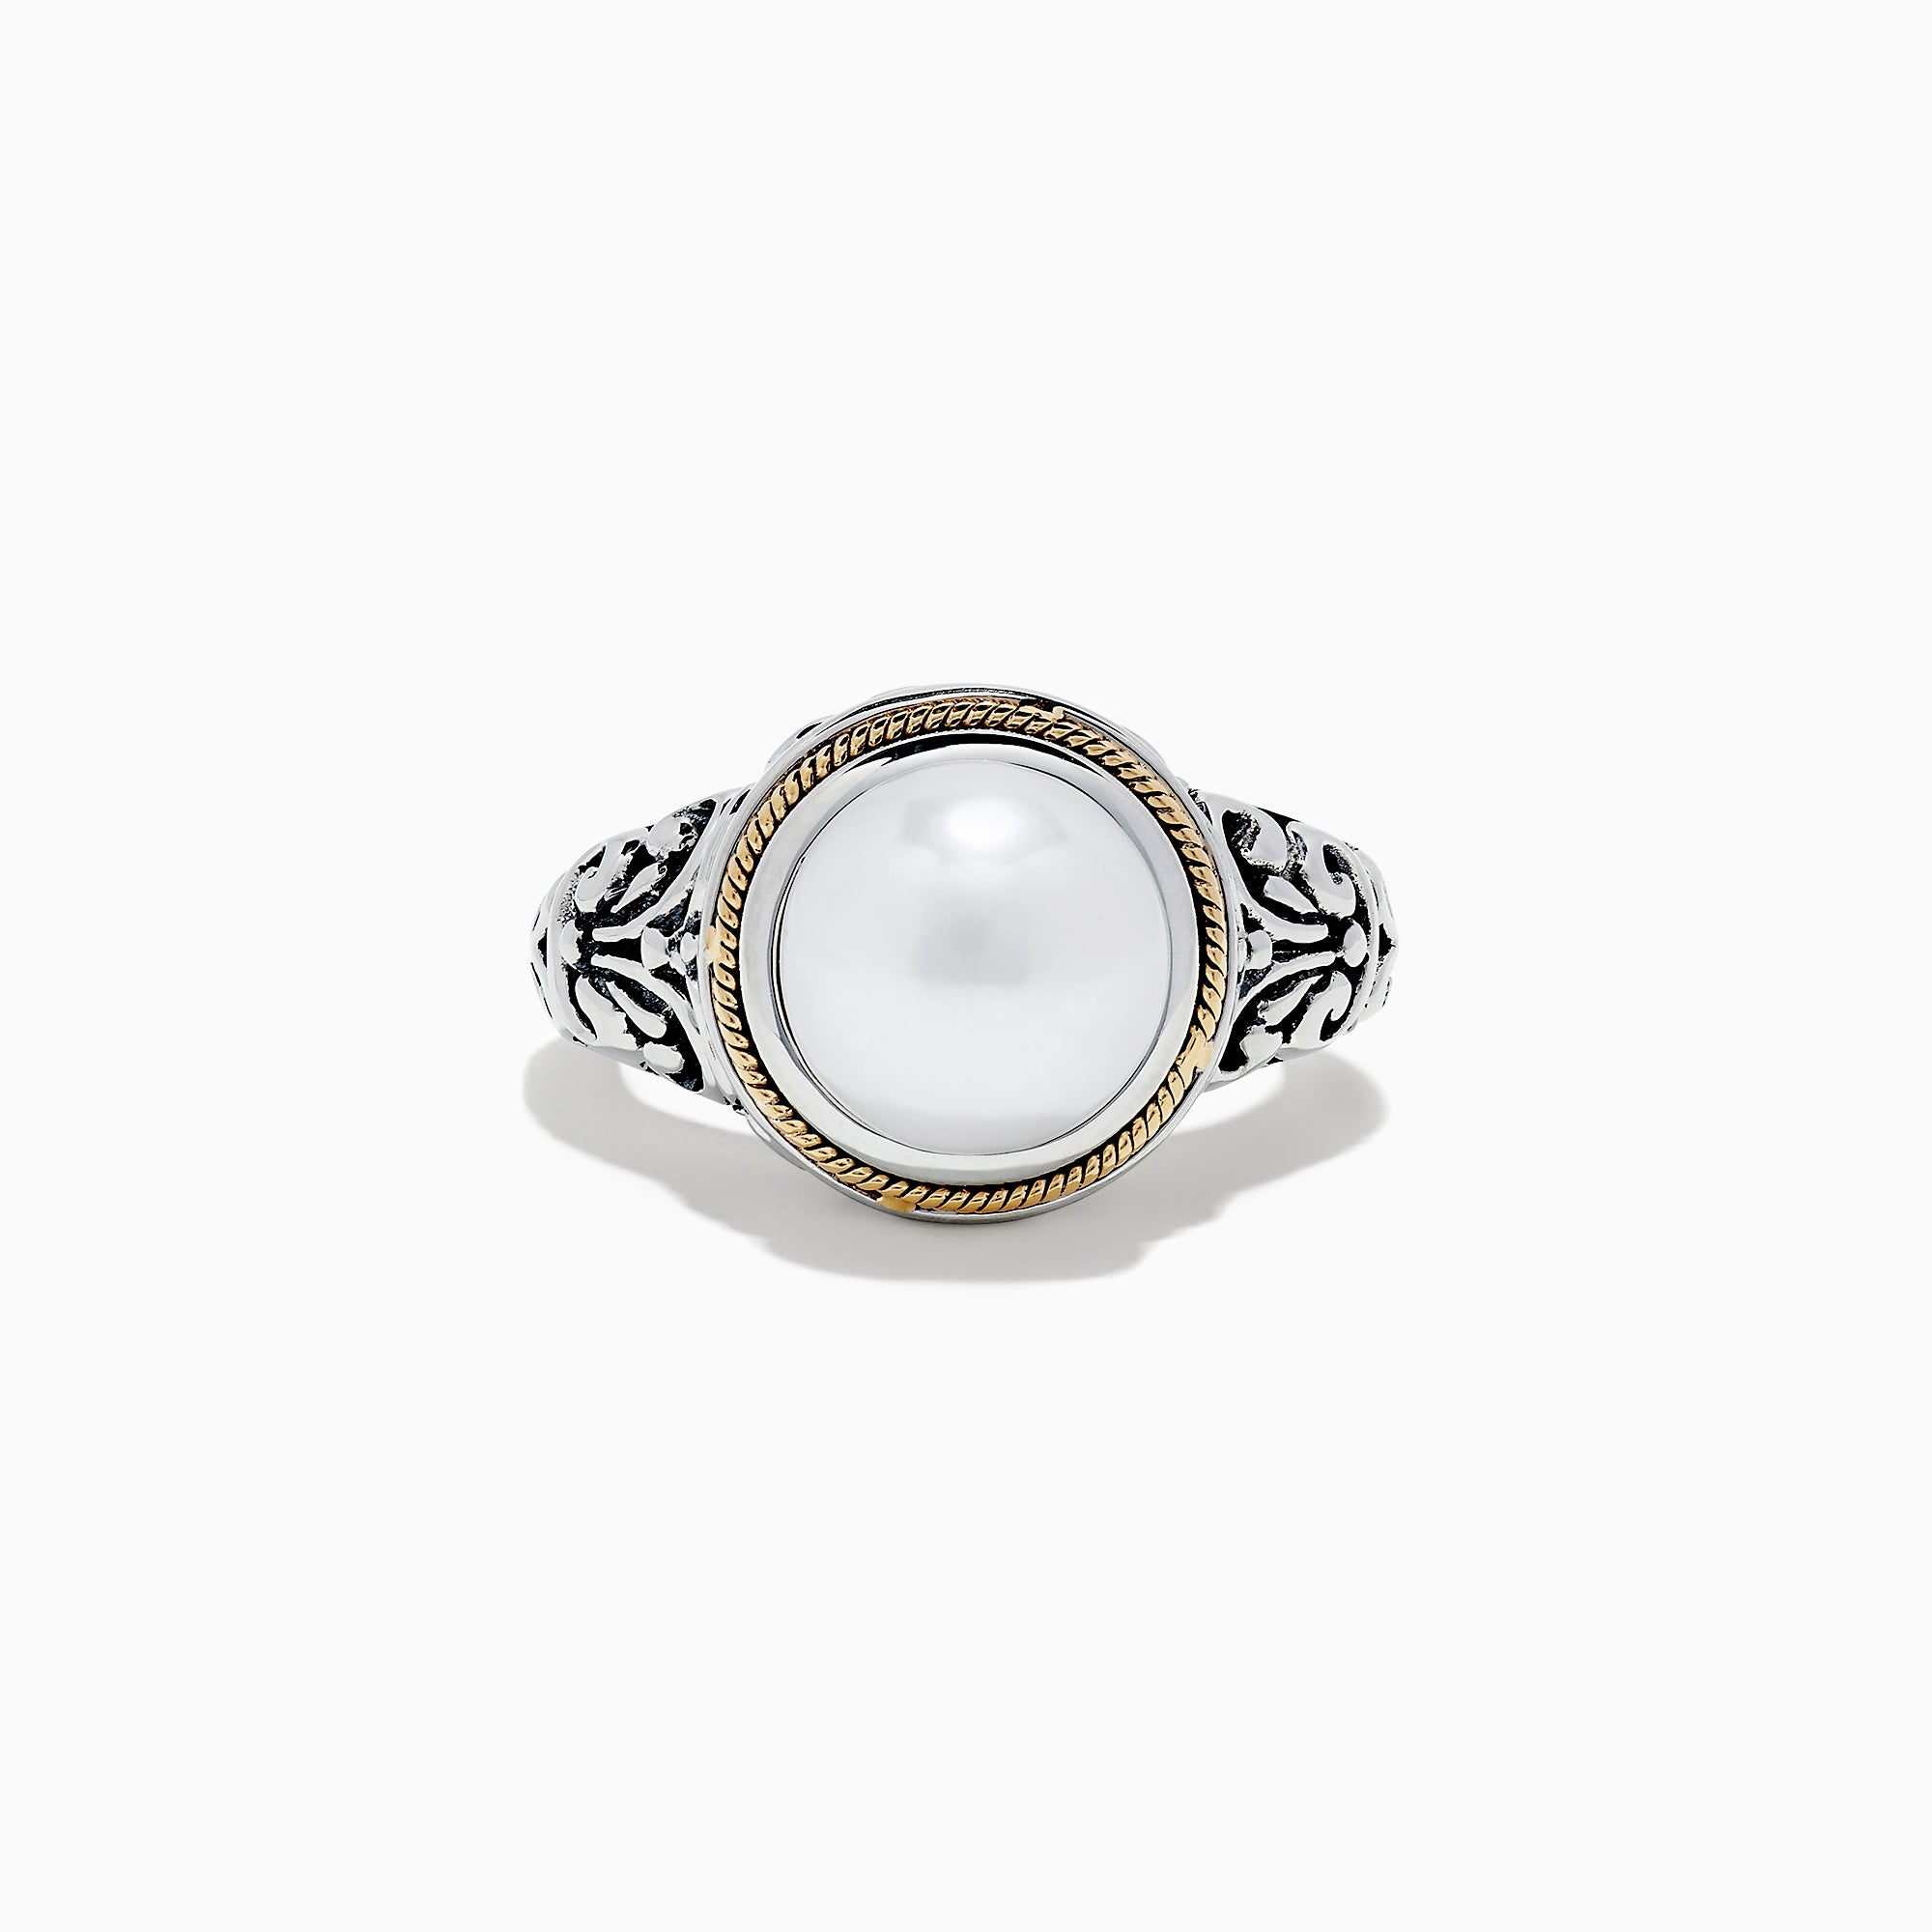 Effy 925 Sterling Silver and 18K Gold Fresh Water Pearl Ring